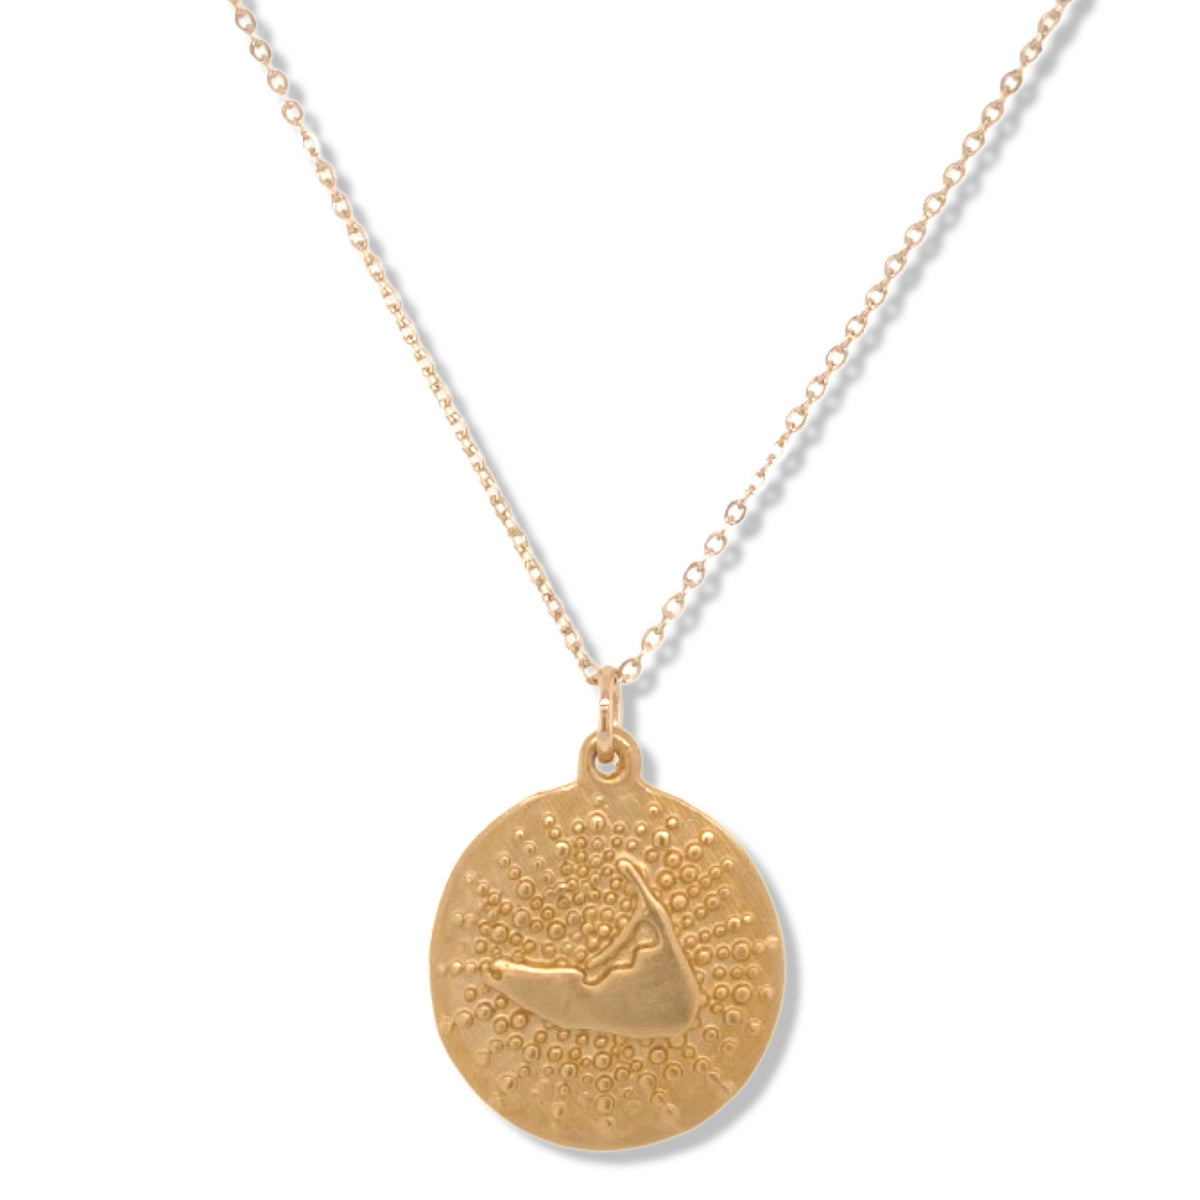 Nantucket Dot Necklace in Gold | Keely Smith Jewelry | Nantucket